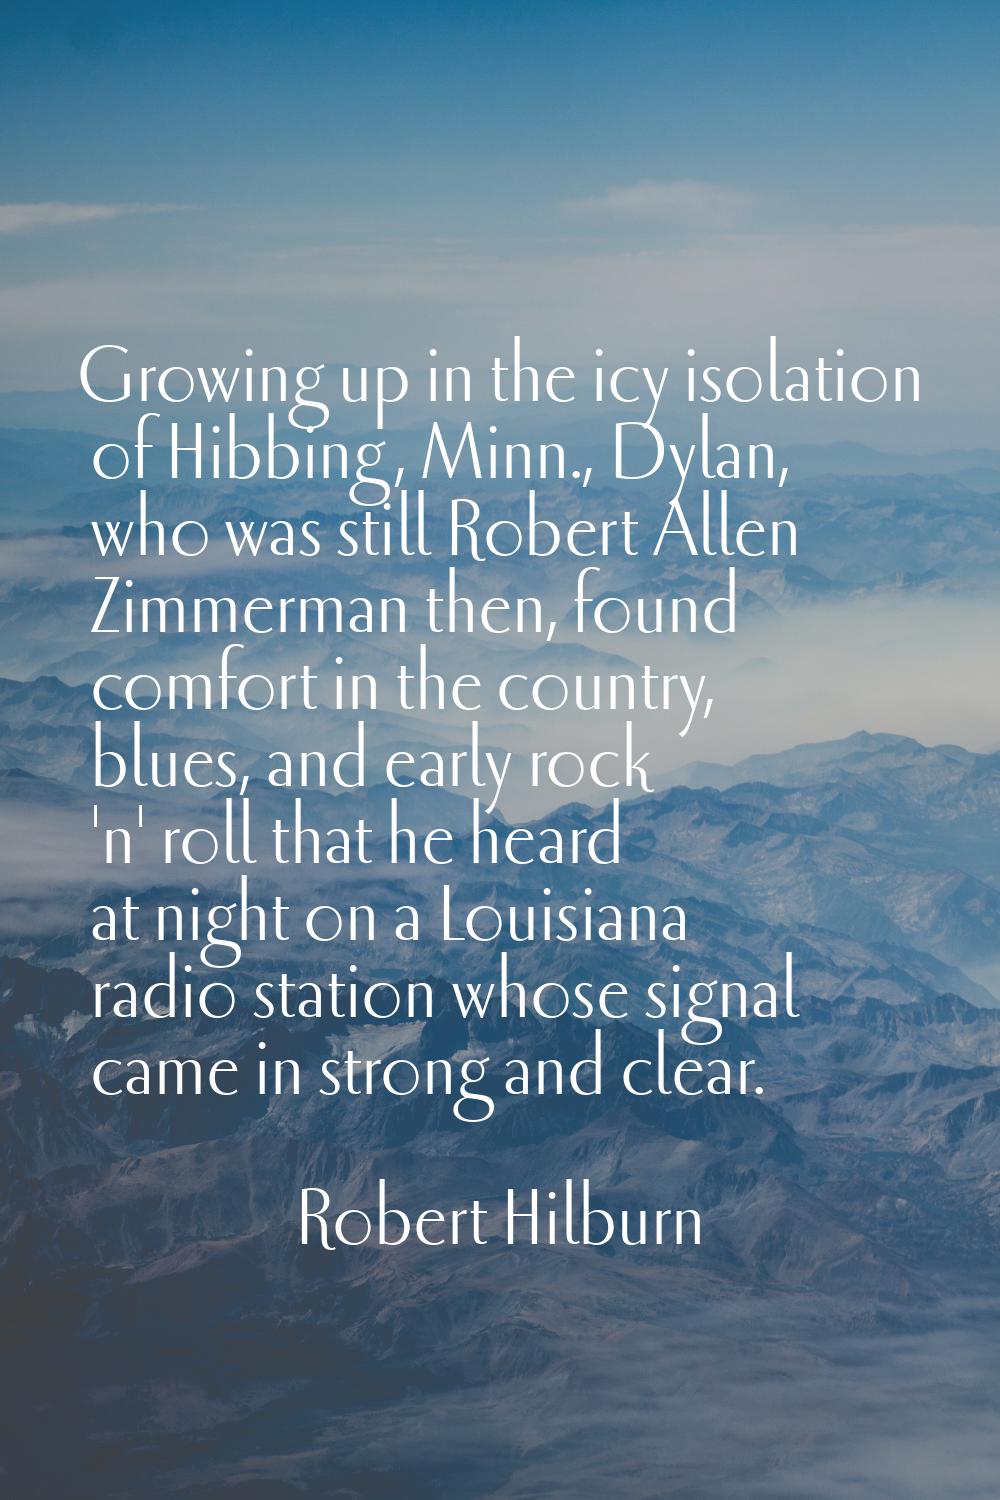 Growing up in the icy isolation of Hibbing, Minn., Dylan, who was still Robert Allen Zimmerman then